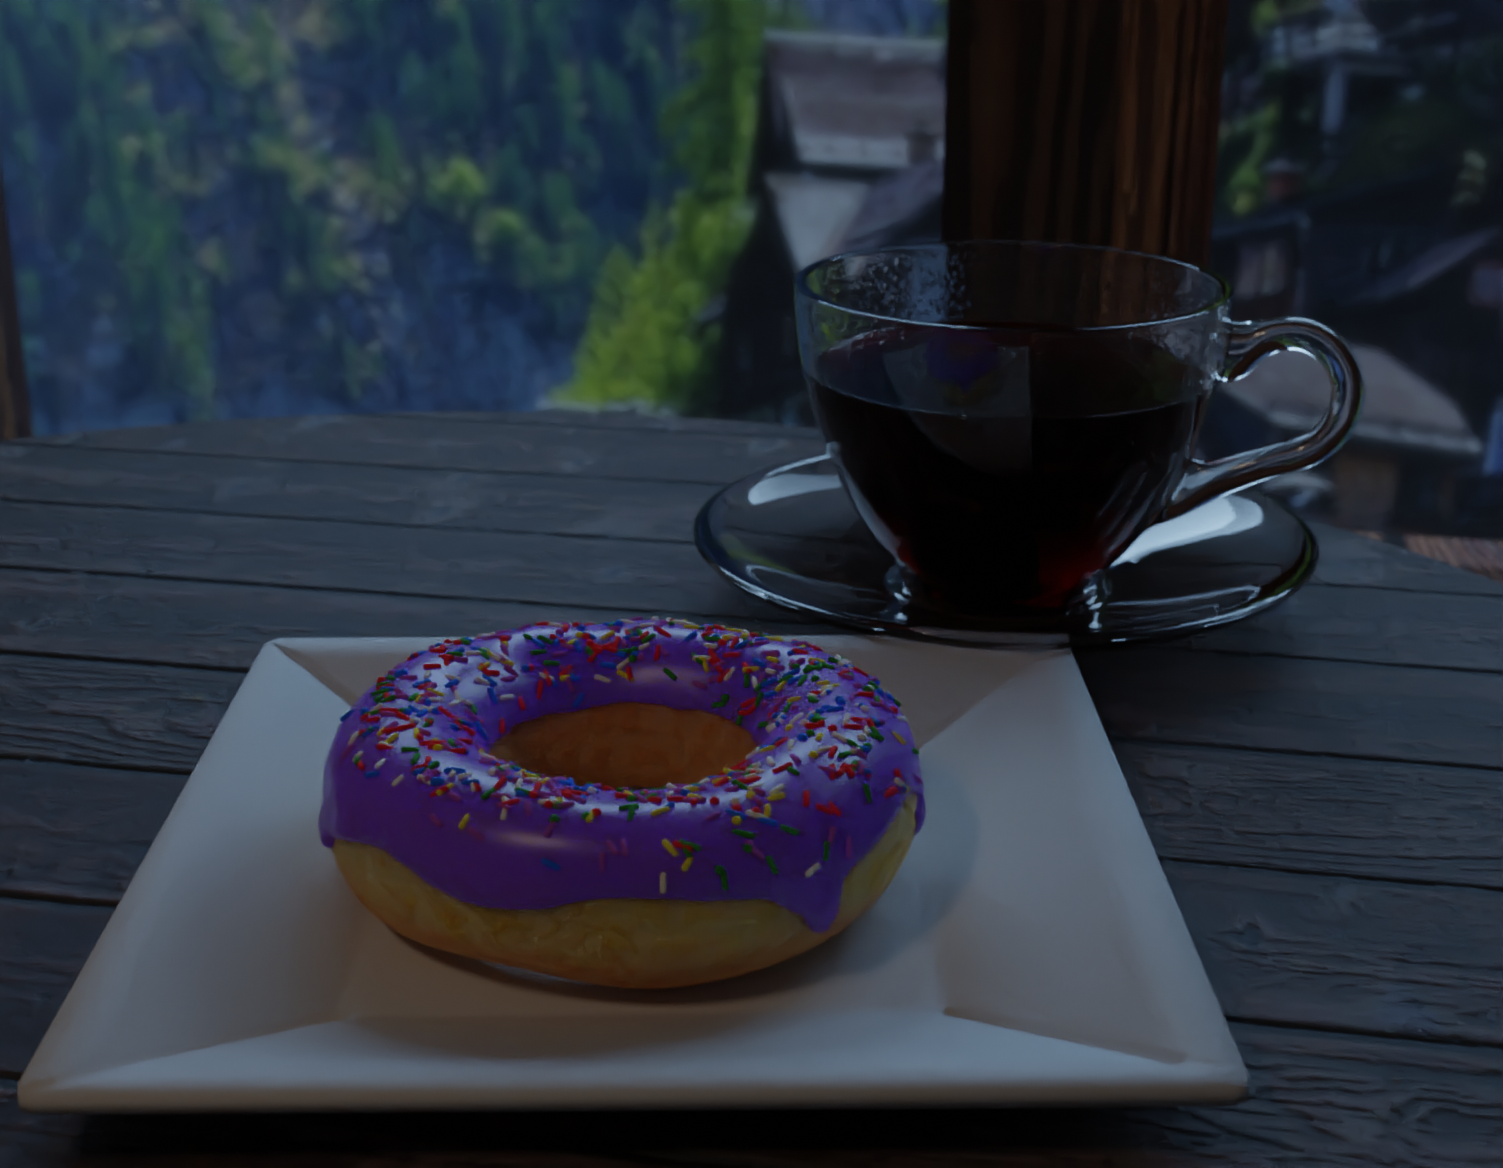 Example of work from donut